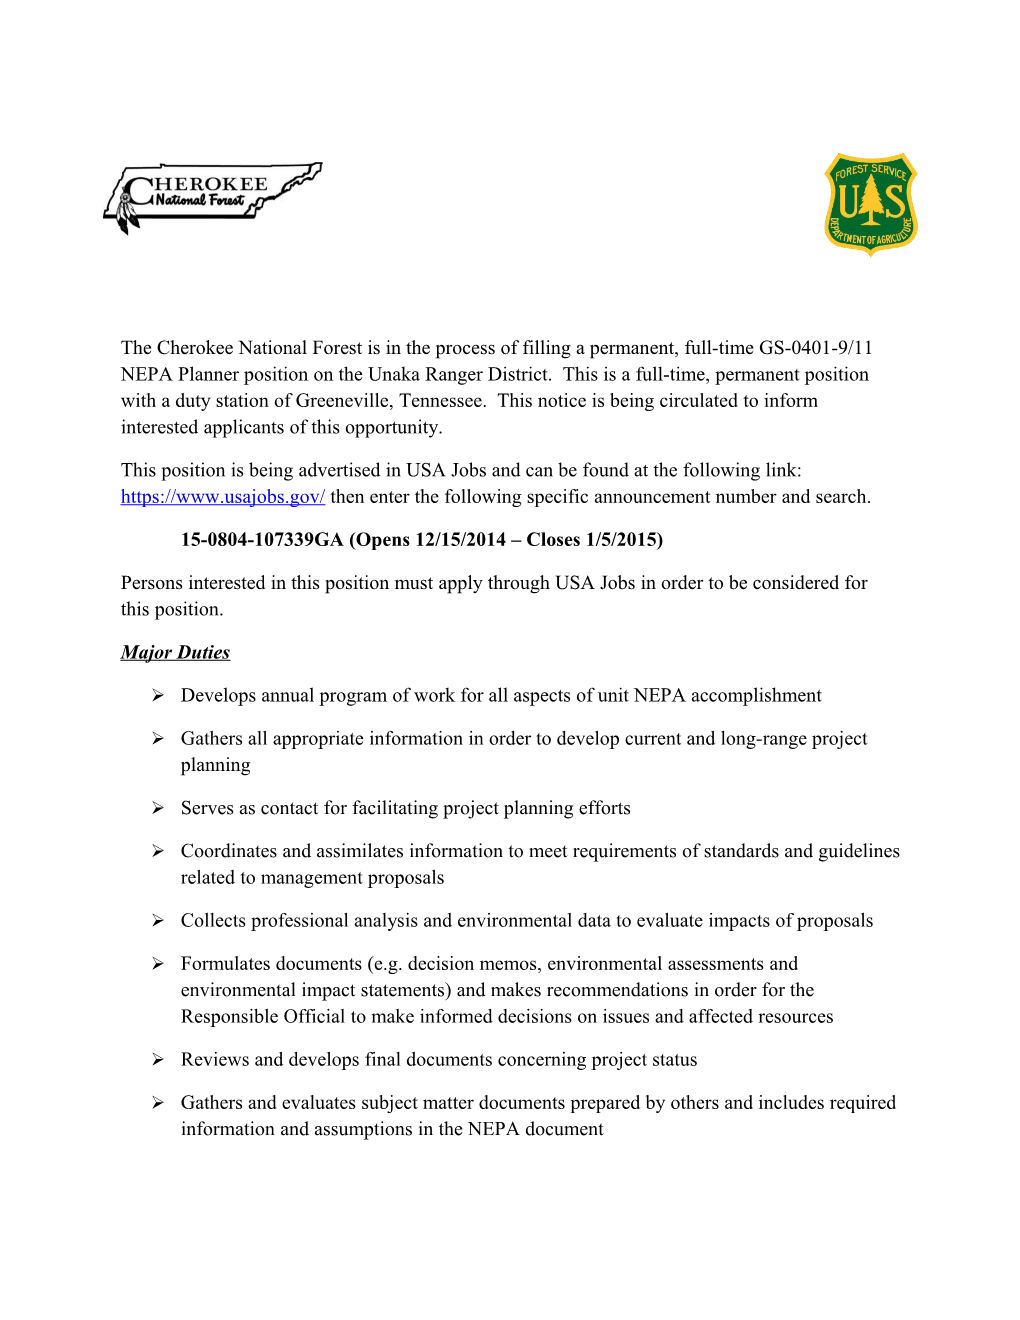 The Cherokee National Forest Is in the Process of Filling a Permanent, Full-Time GS-0401-9/11